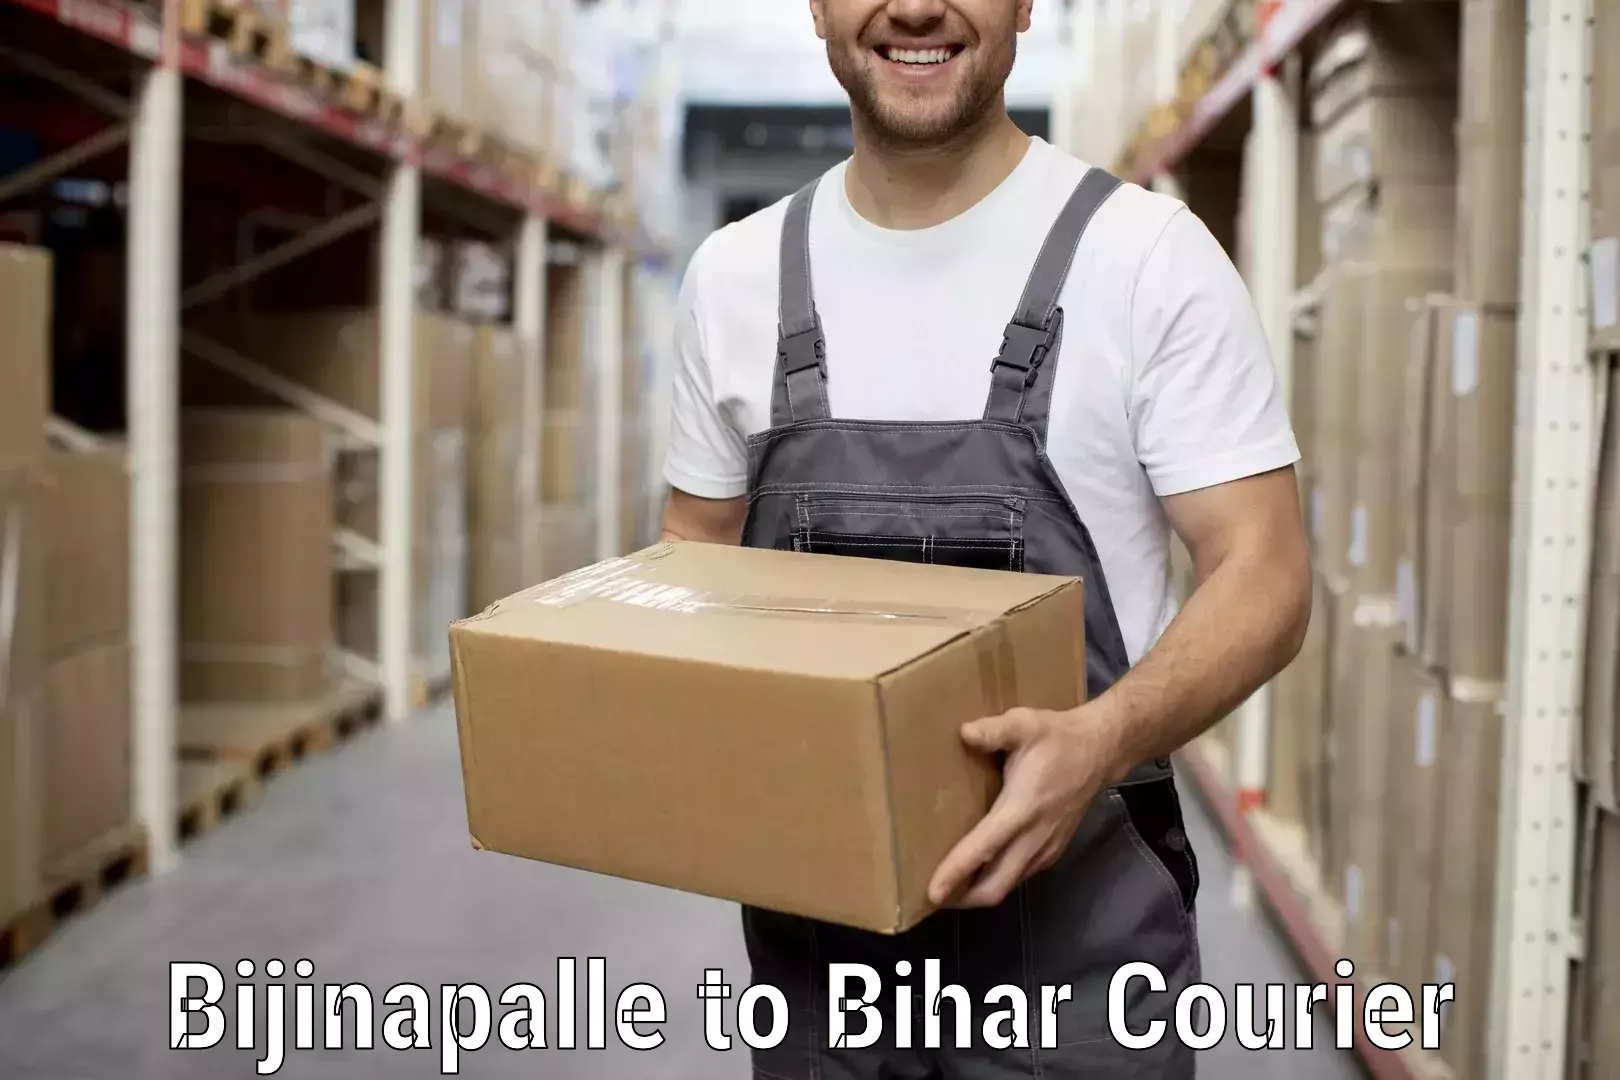 Personalized moving service Bijinapalle to Kochas